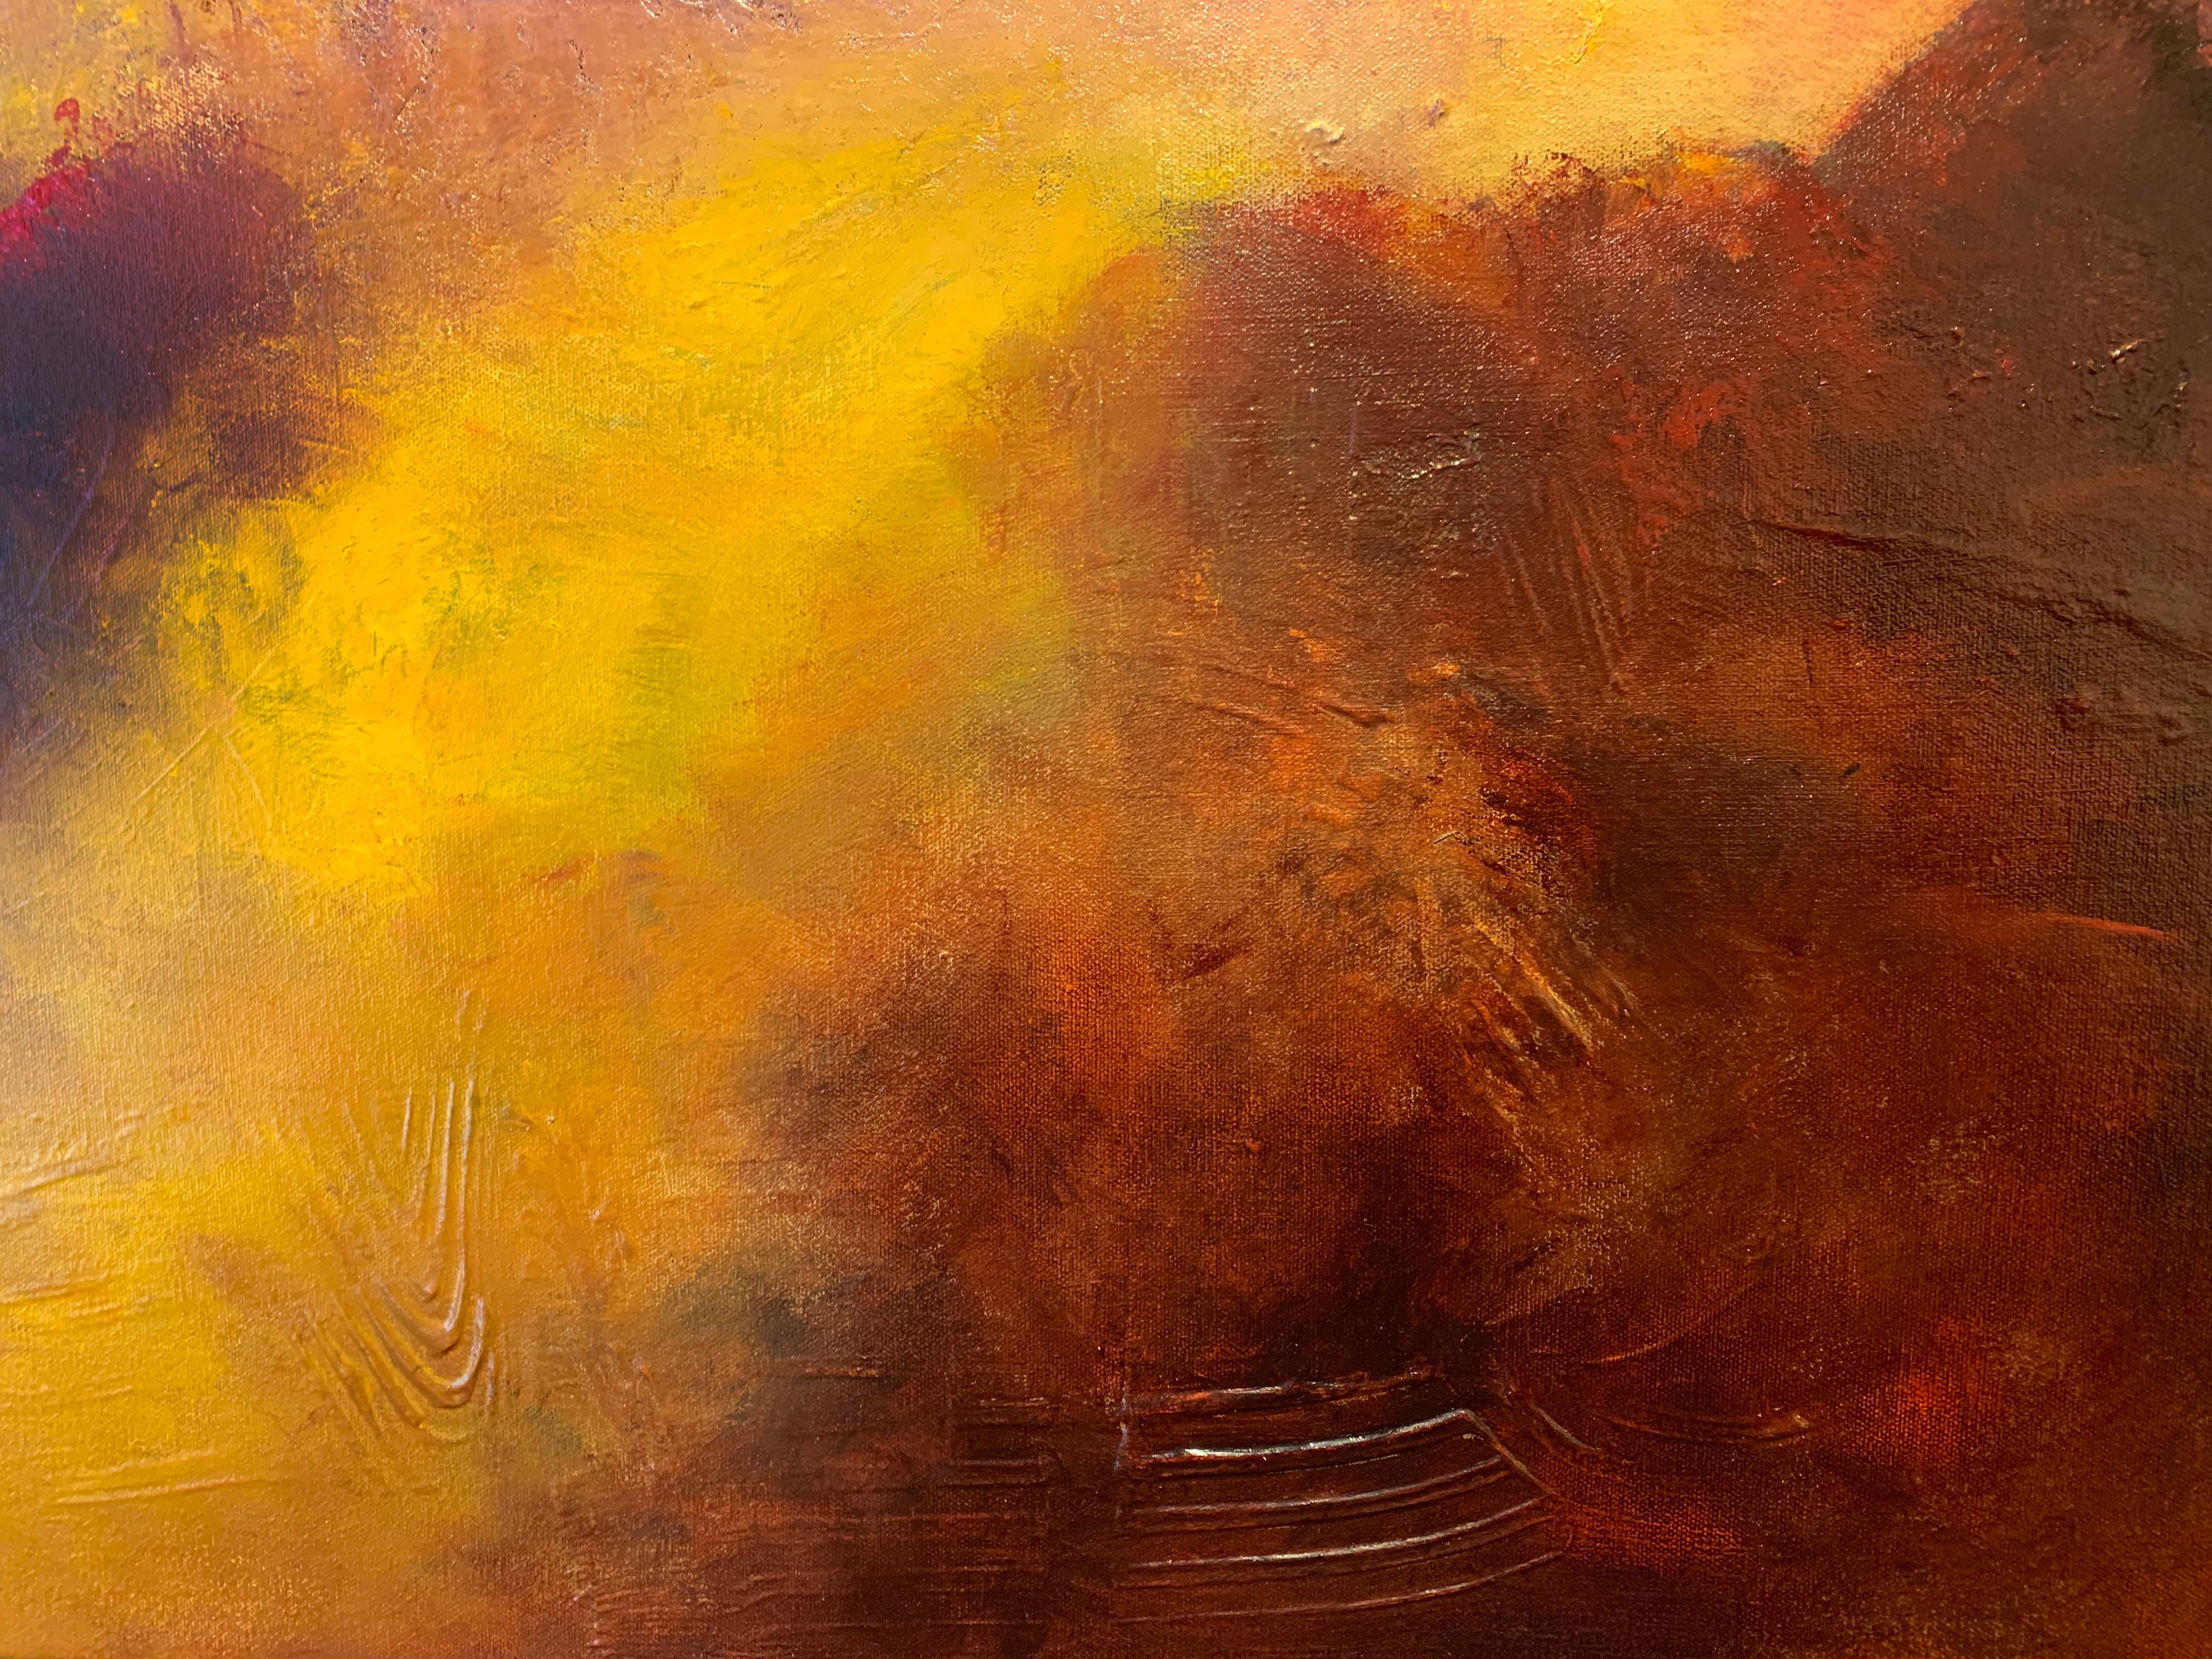 Nature's Glow - a sense of mystery shrouds this mountain landscape - Brown Abstract Painting by Aleta Pippin